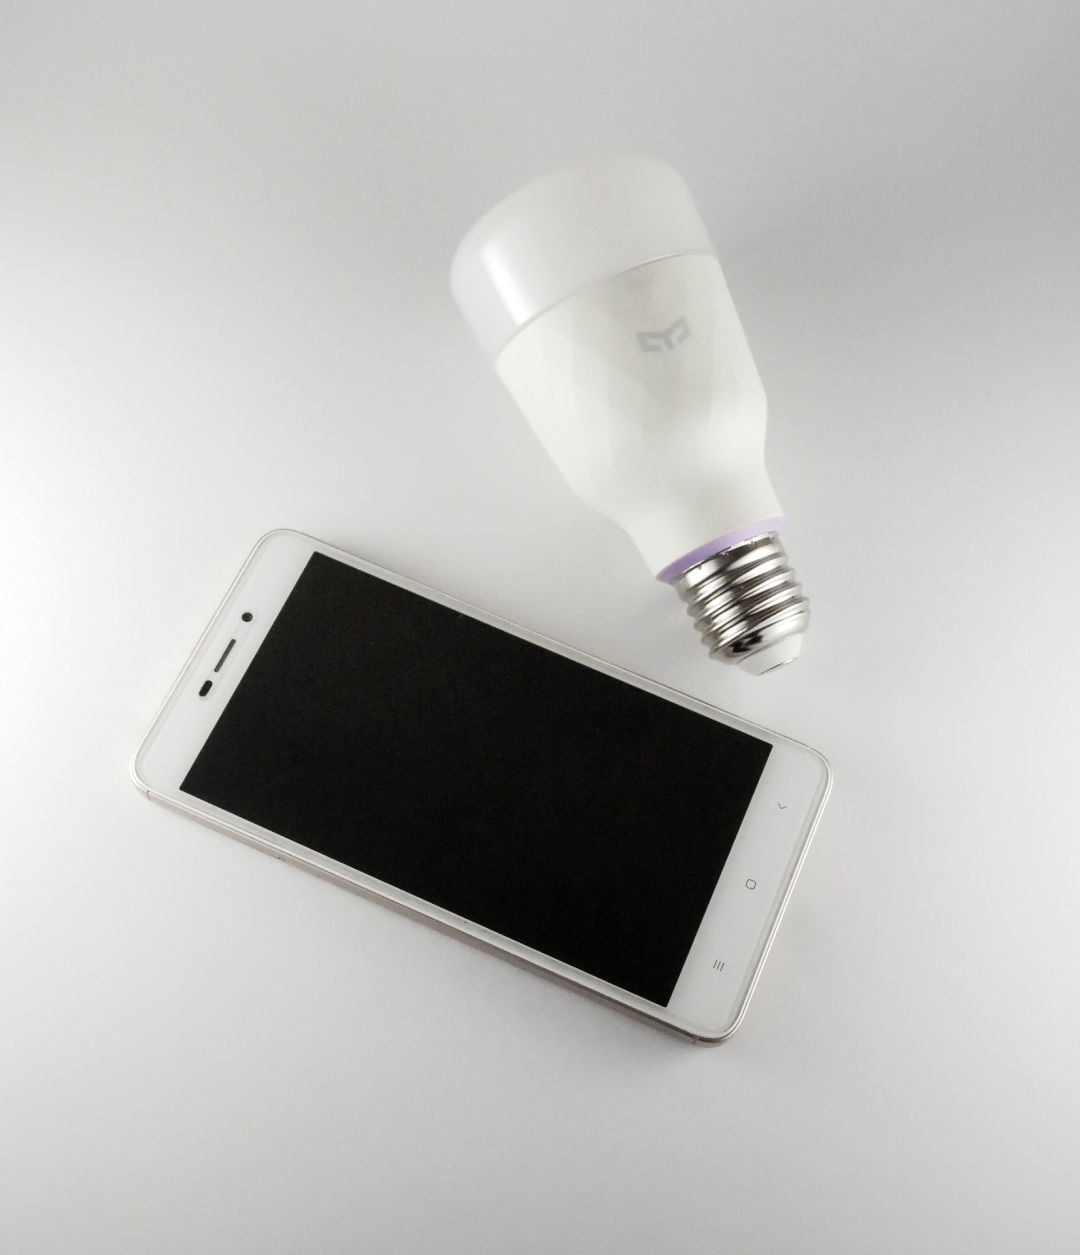 smart bulb that can be operated from a mobile phone